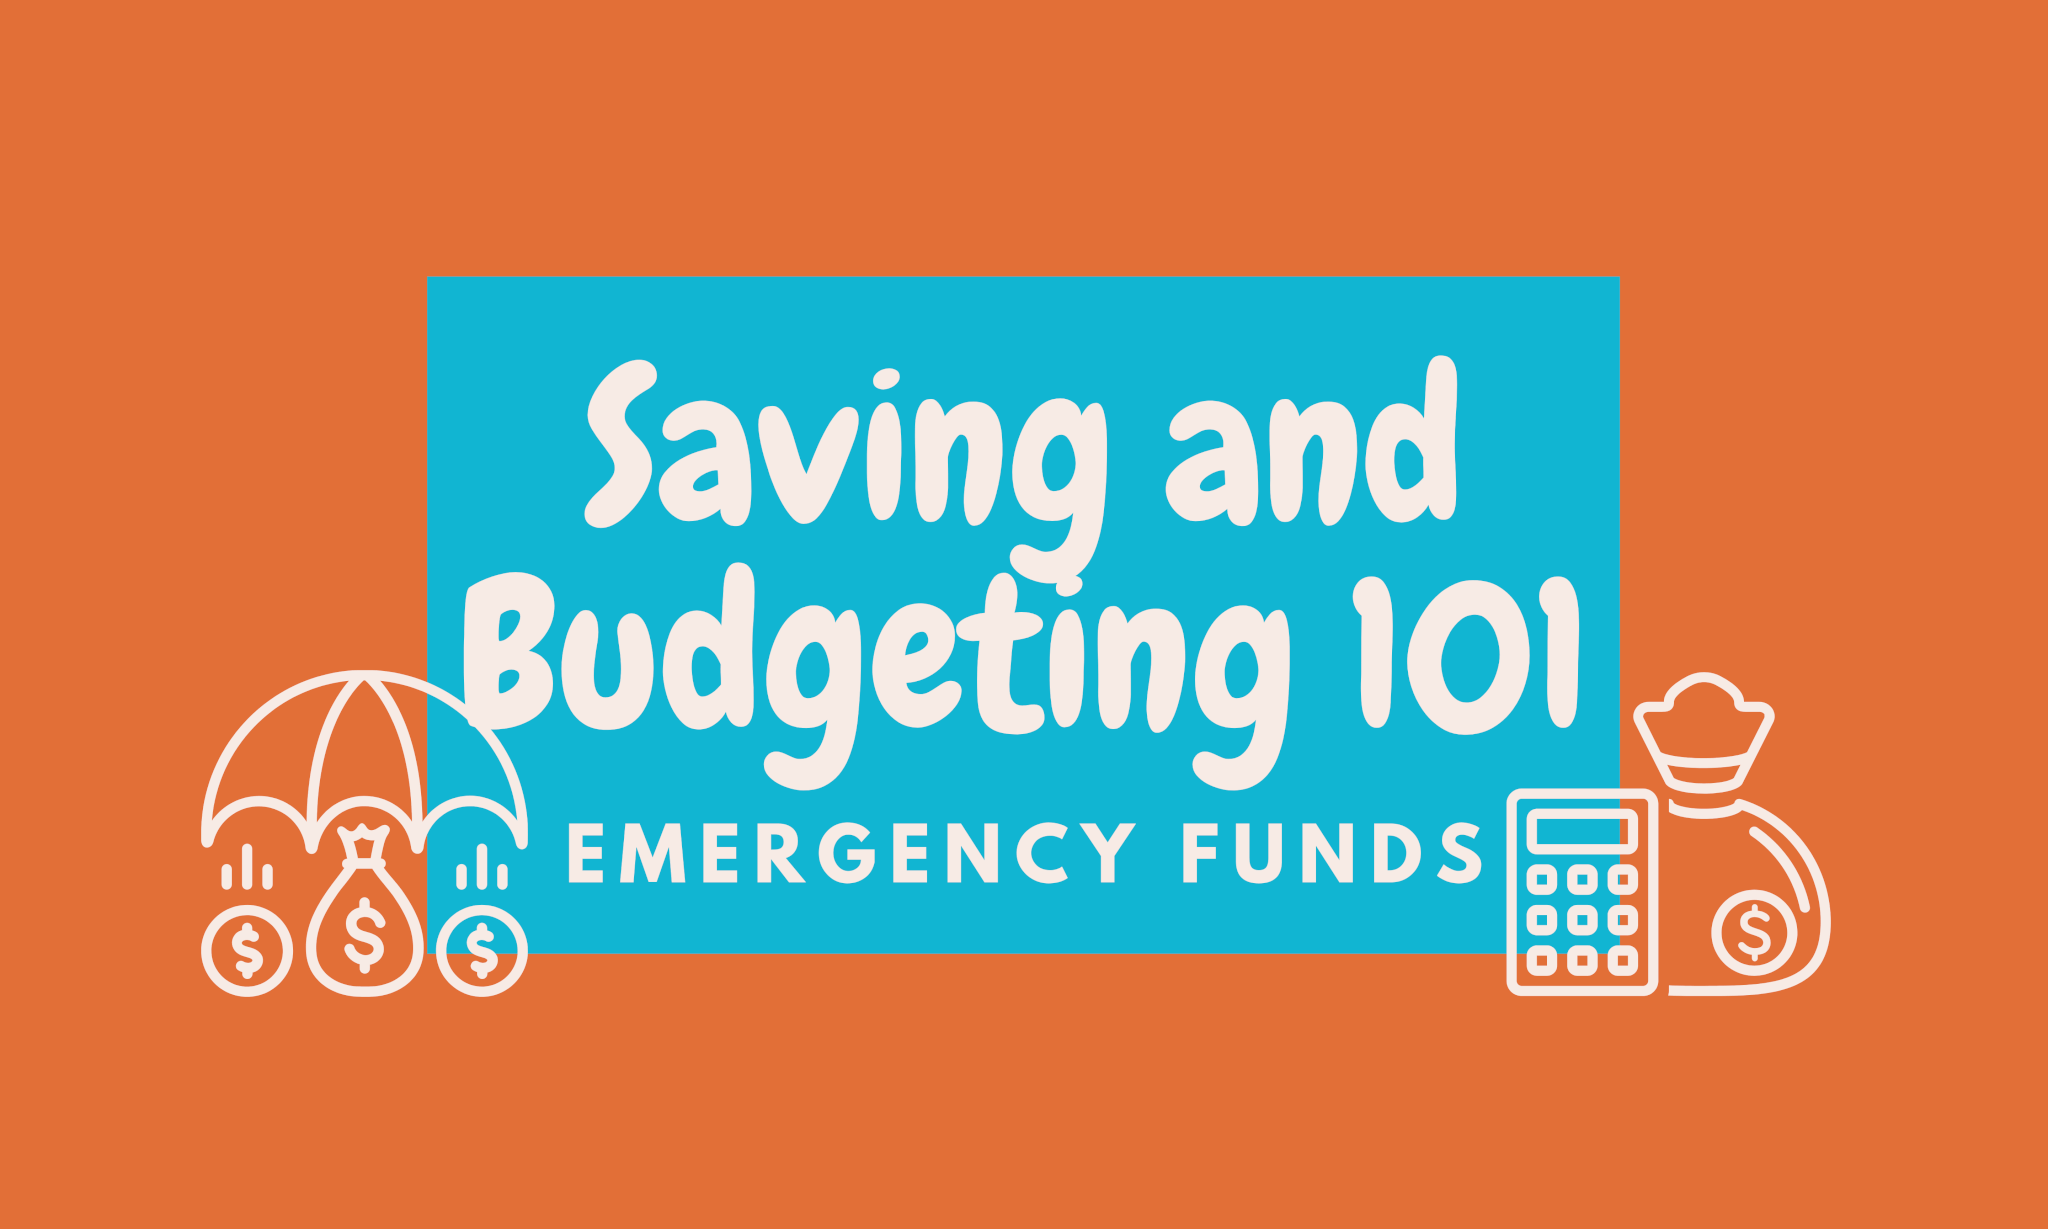 Saving and Budgeting 101: Emergency Funds